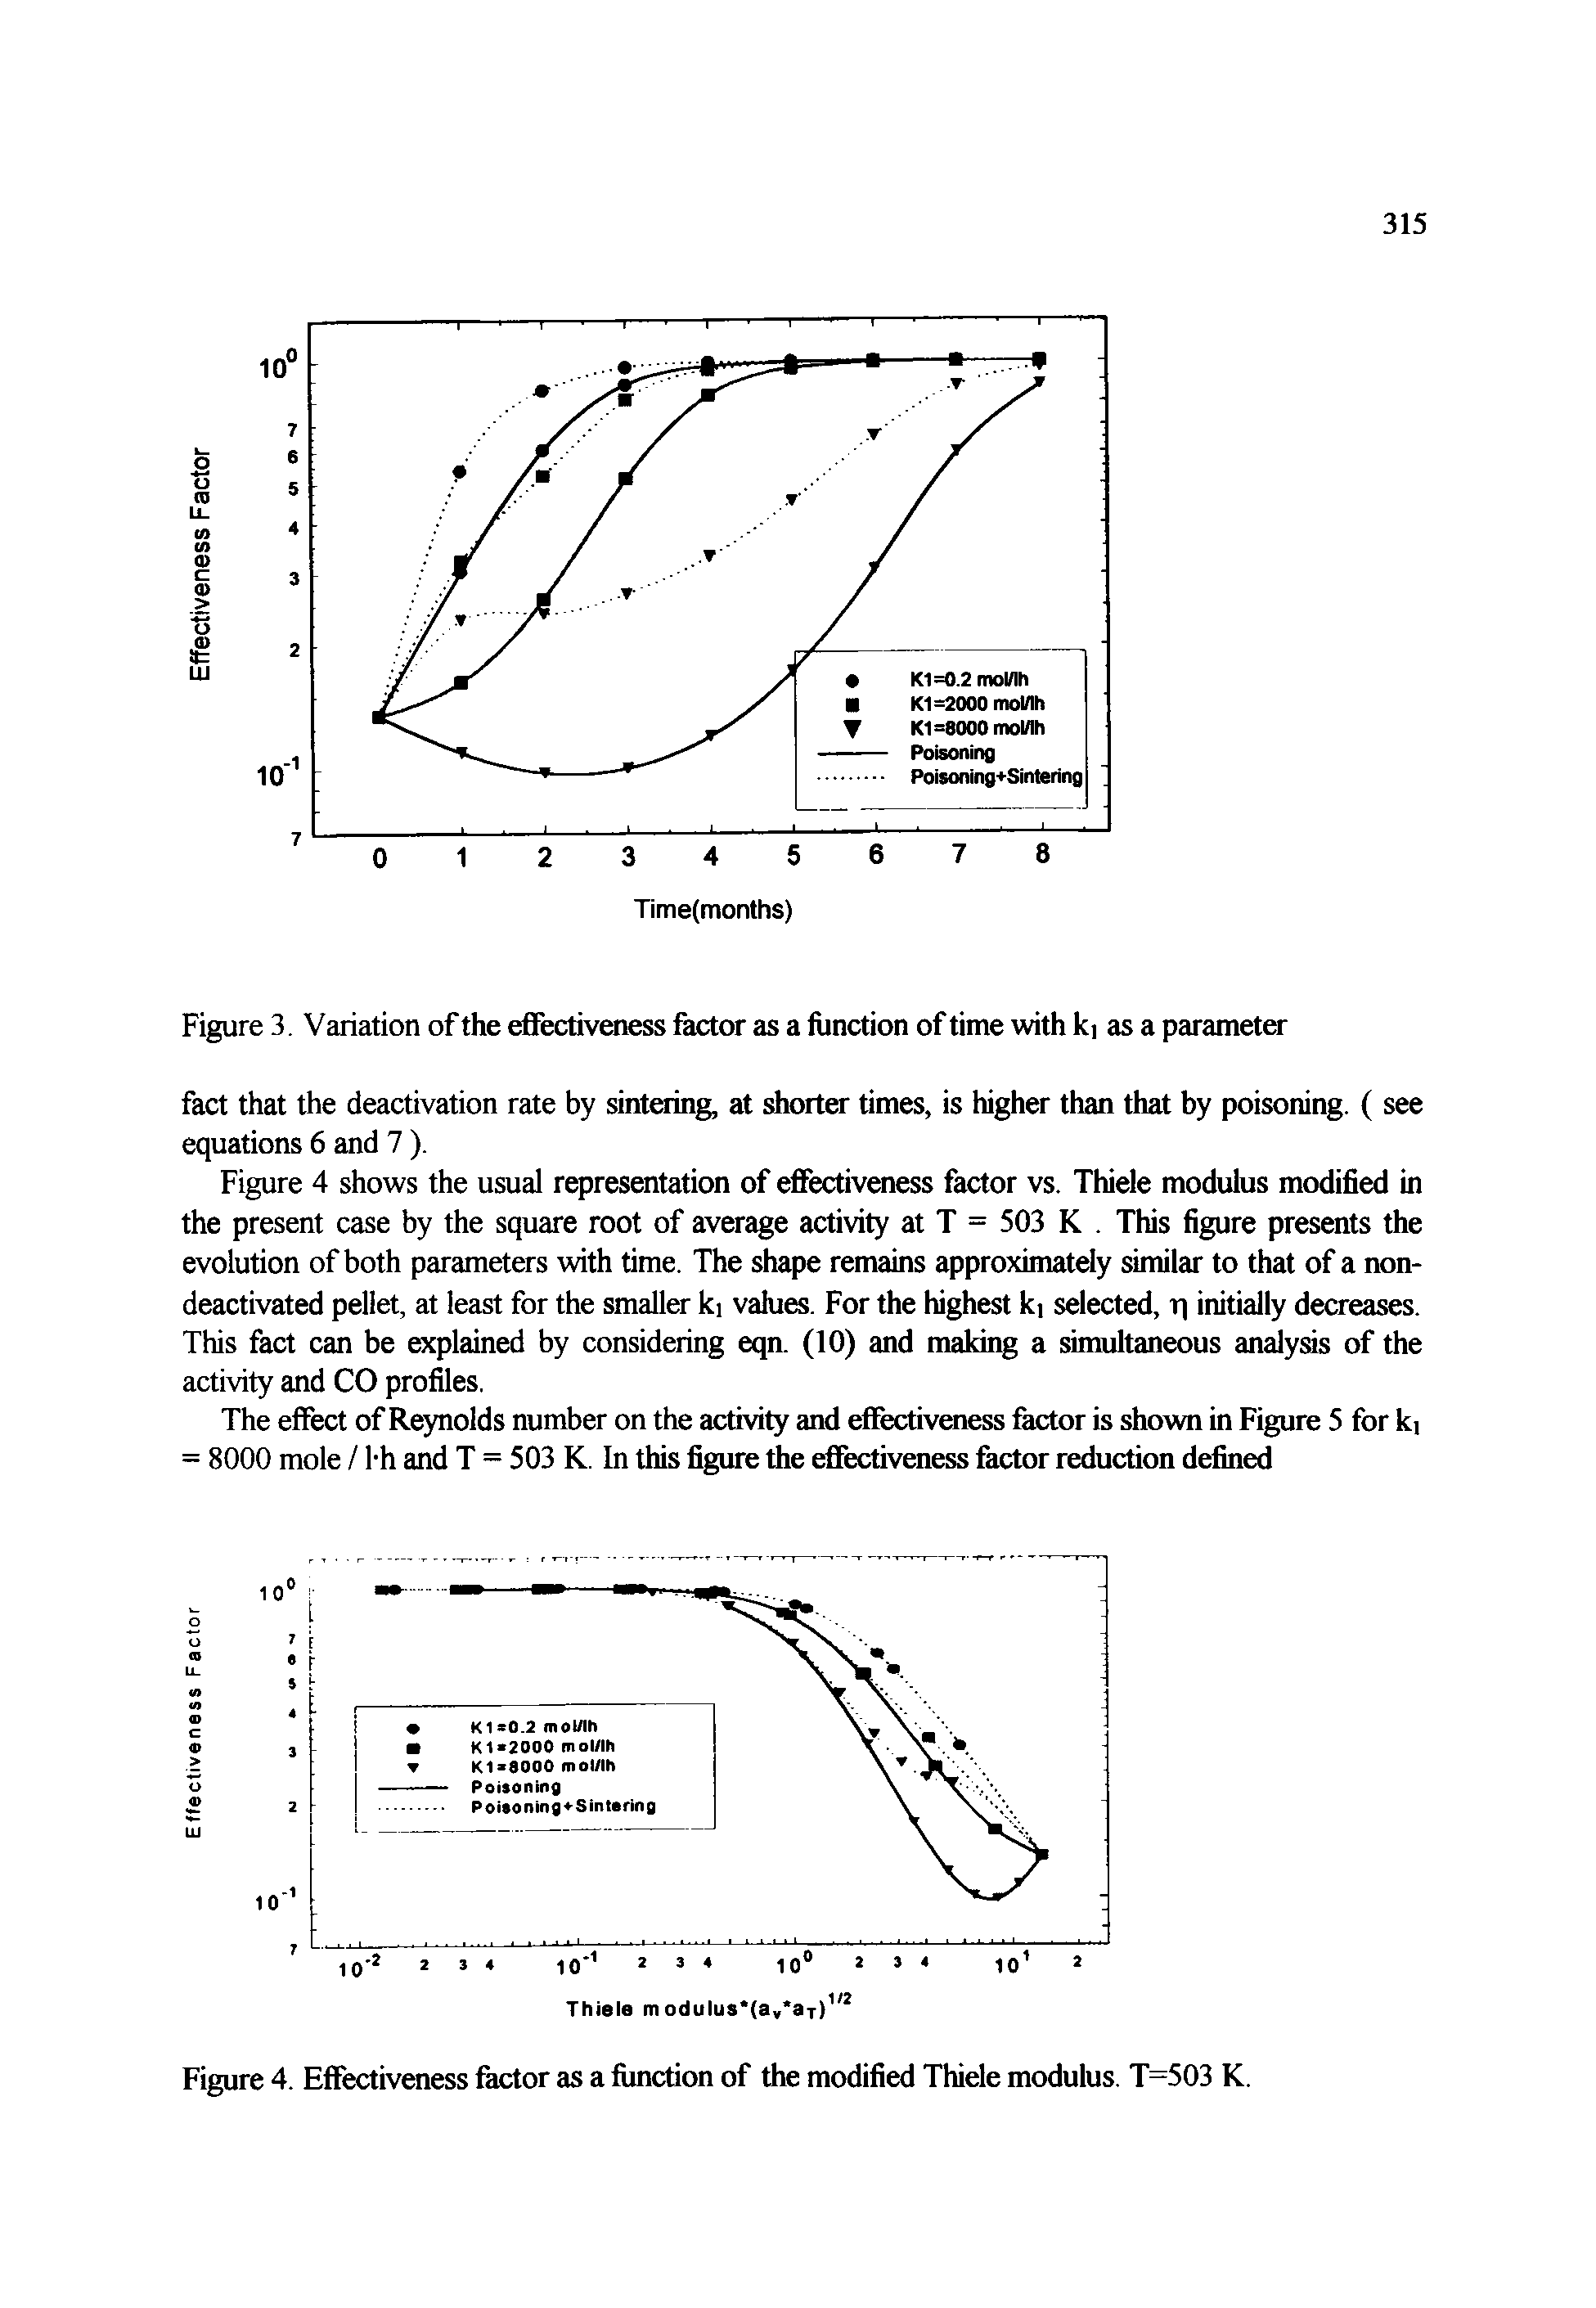 Figure 4. Effectiveness factor as a flmction of the modified Thiele modulus. T=503 K.